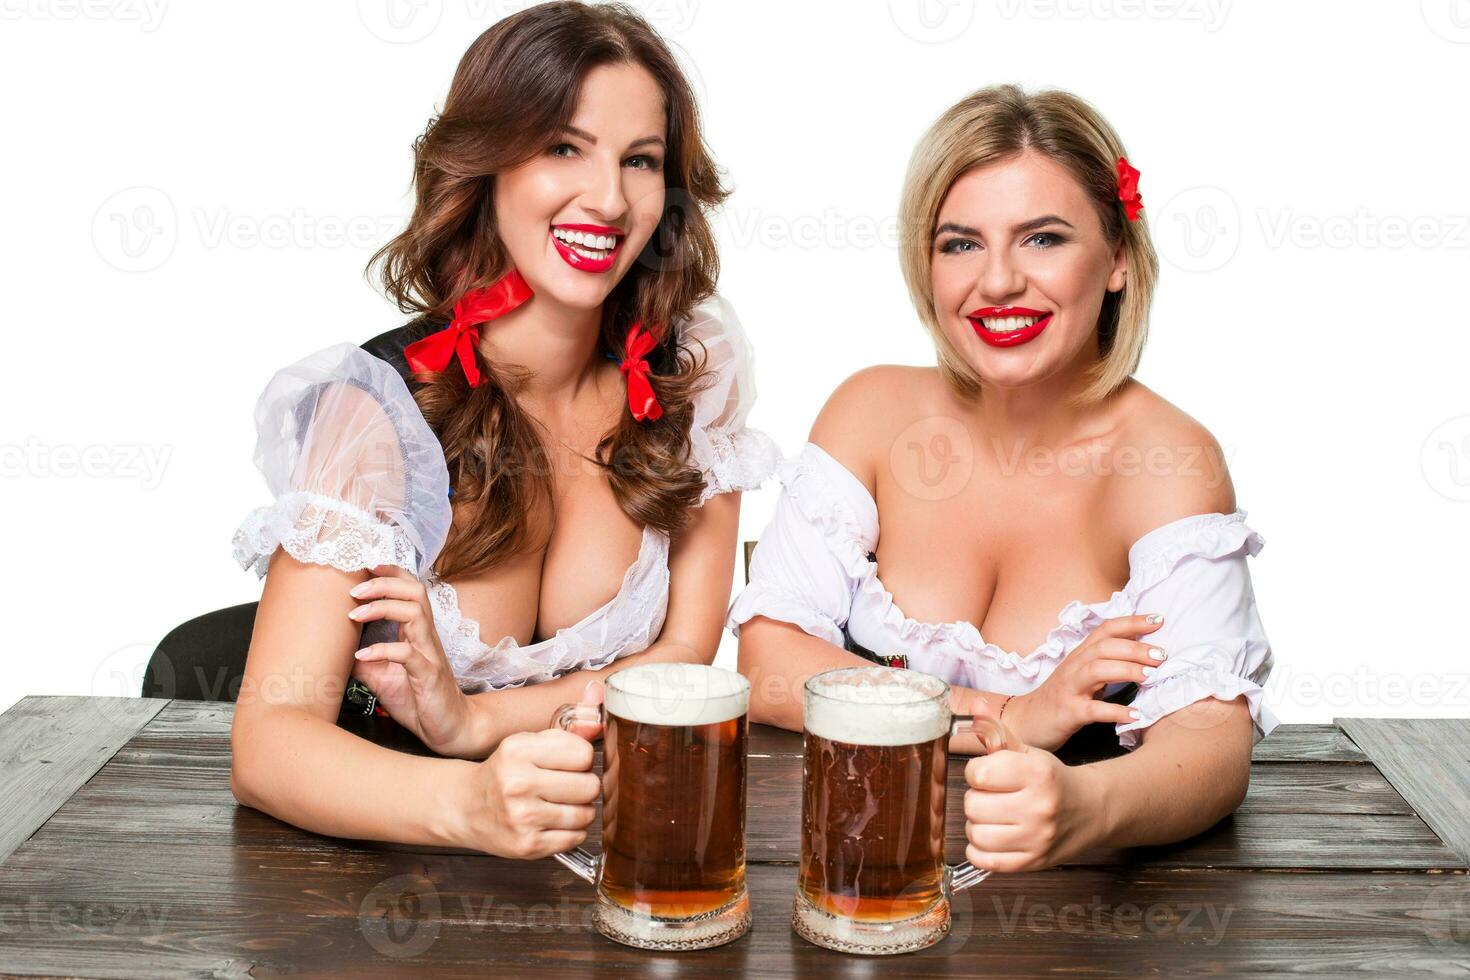 Two beautiful blond and brunette girls of oktoberfest beer stein photo